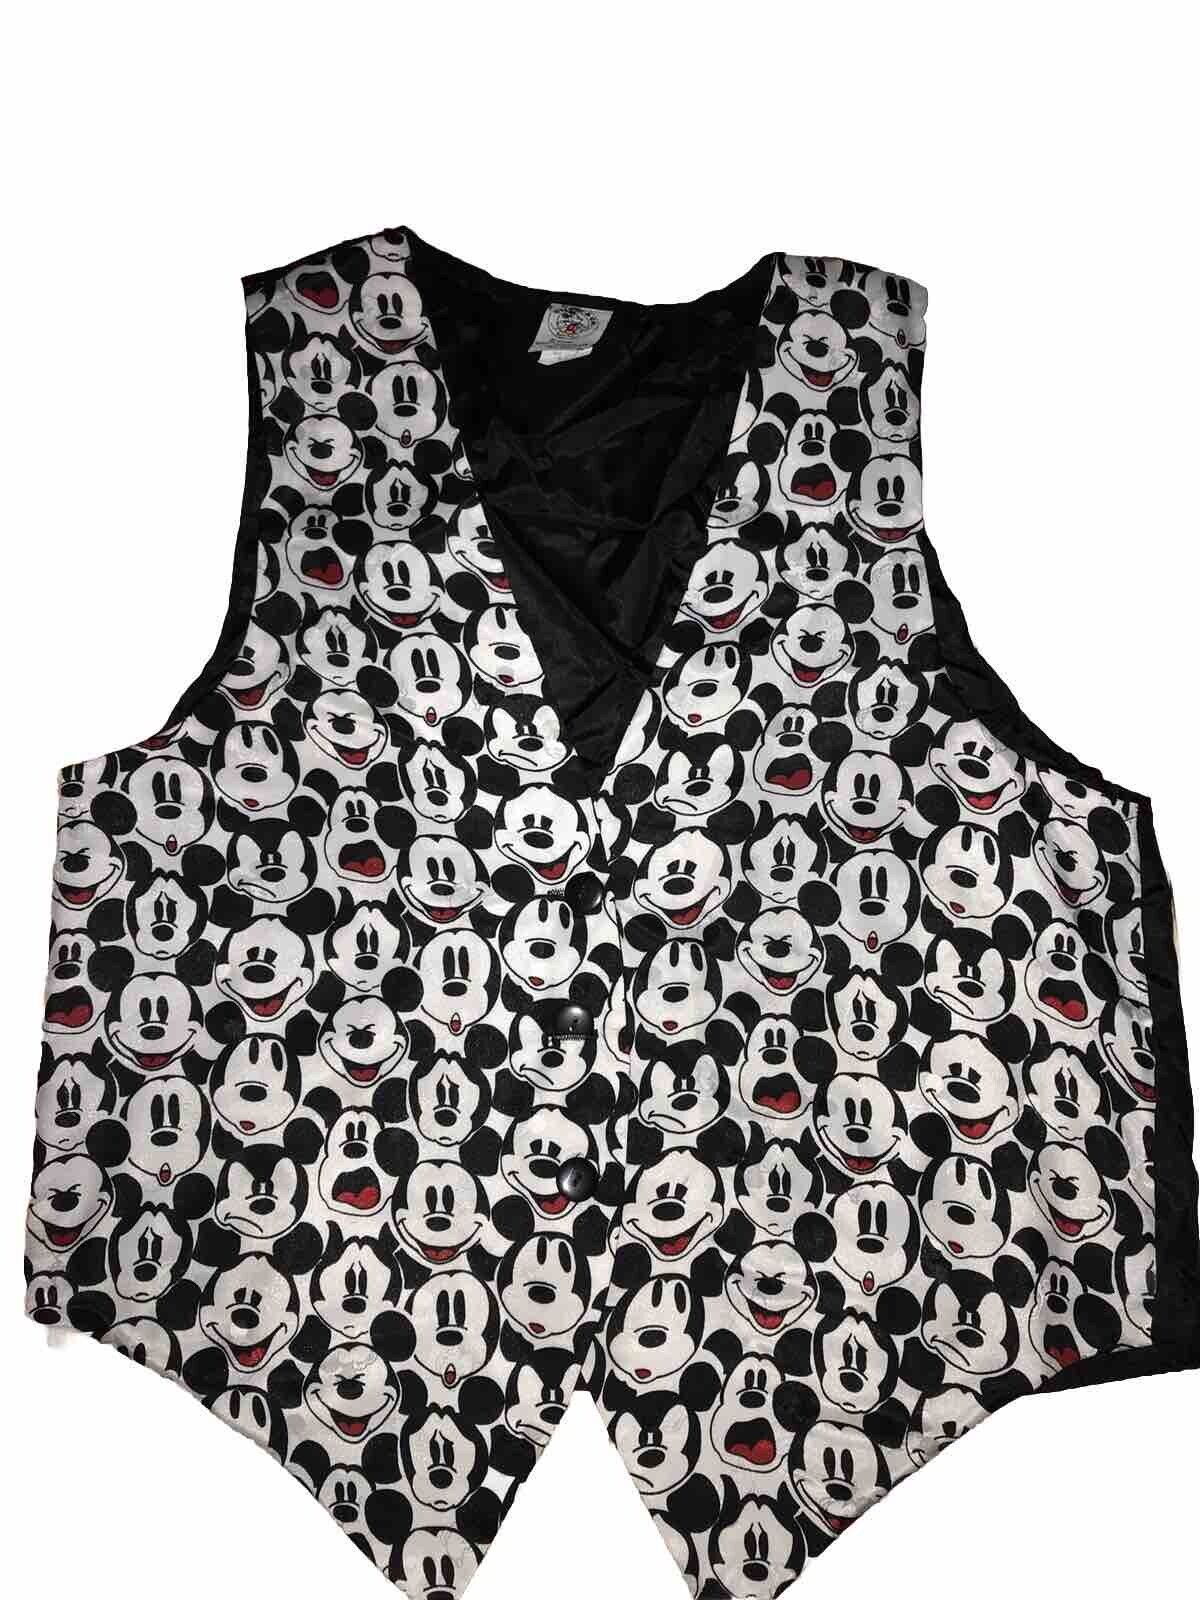 Vintage Reflective Stitching Mickey & Co Vest Made In USA Adult M/L Black/White